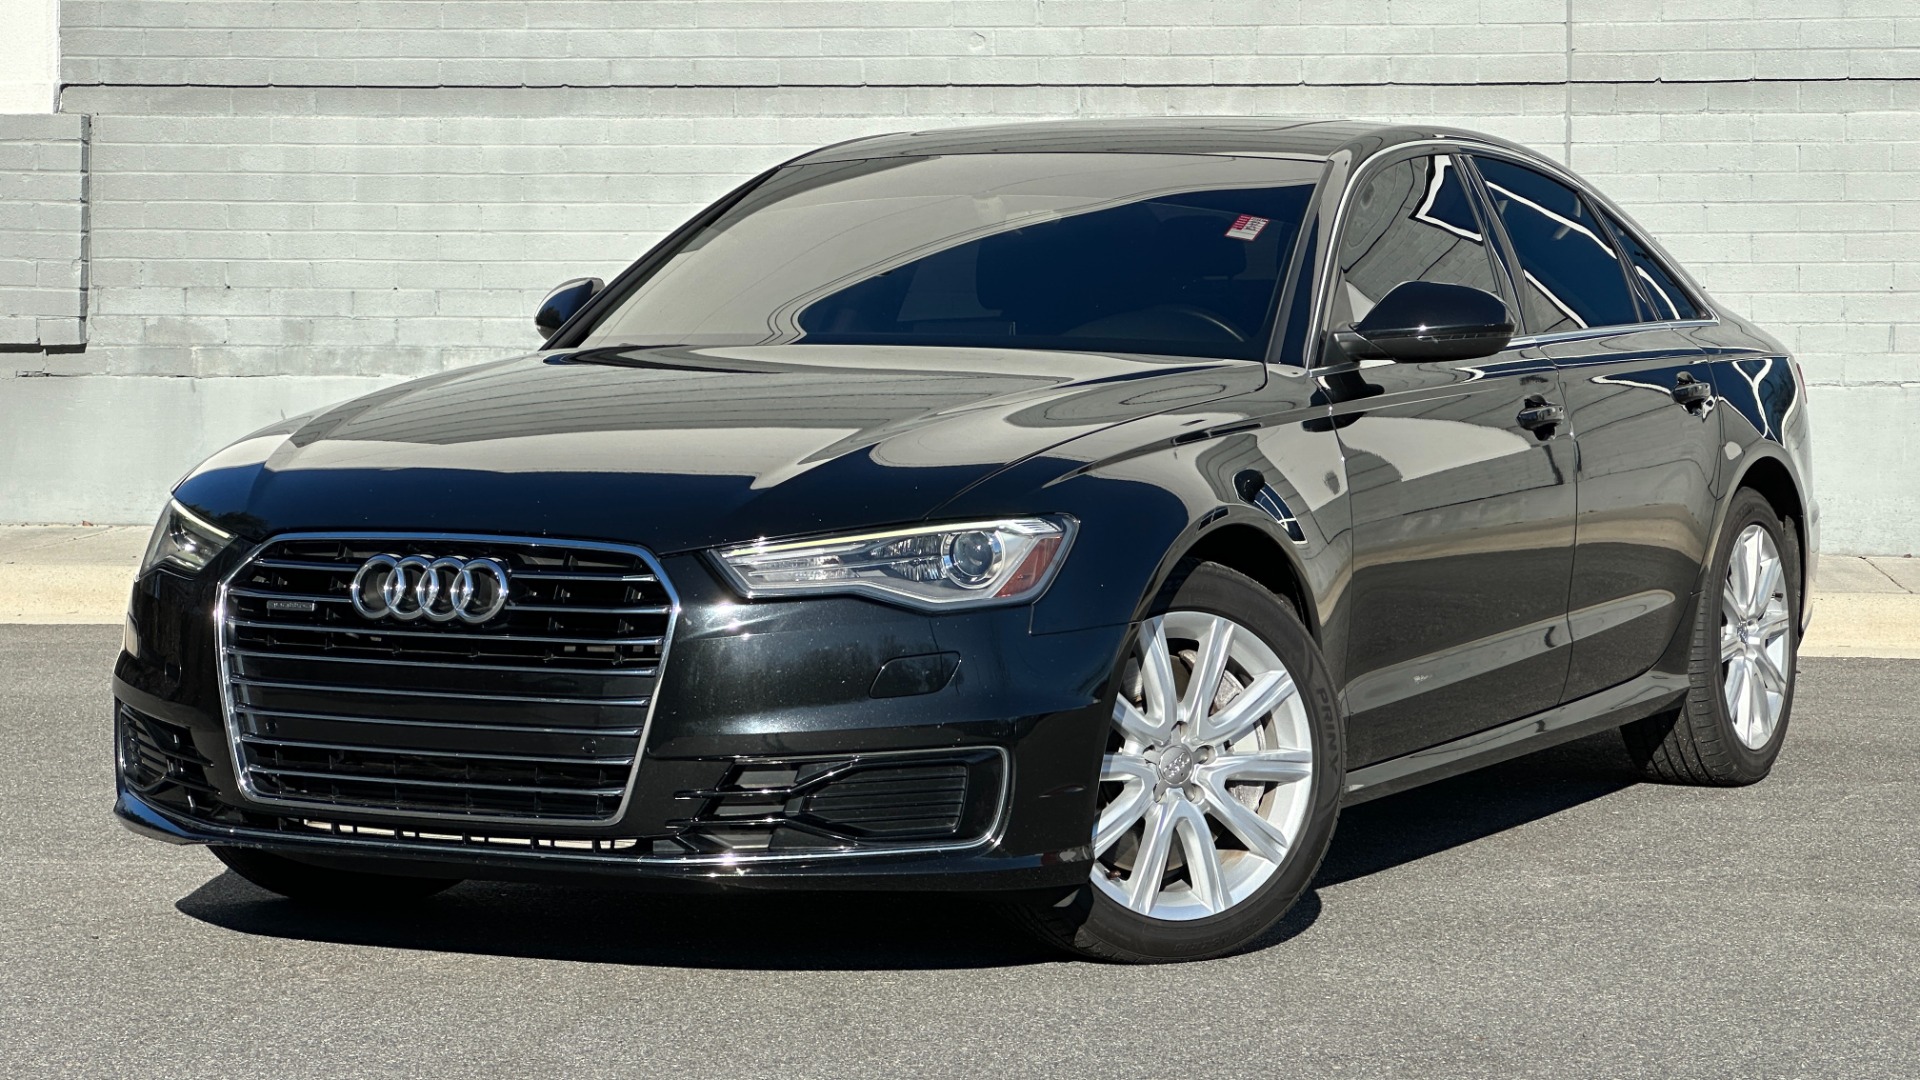 Used 2016 Audi A6 2.0T PREMIUM / LEATHER / SUNROOF / HEATED SEATS / QUATTRO ALL WHEEL DRIVE for sale Sold at Formula Imports in Charlotte NC 28227 1